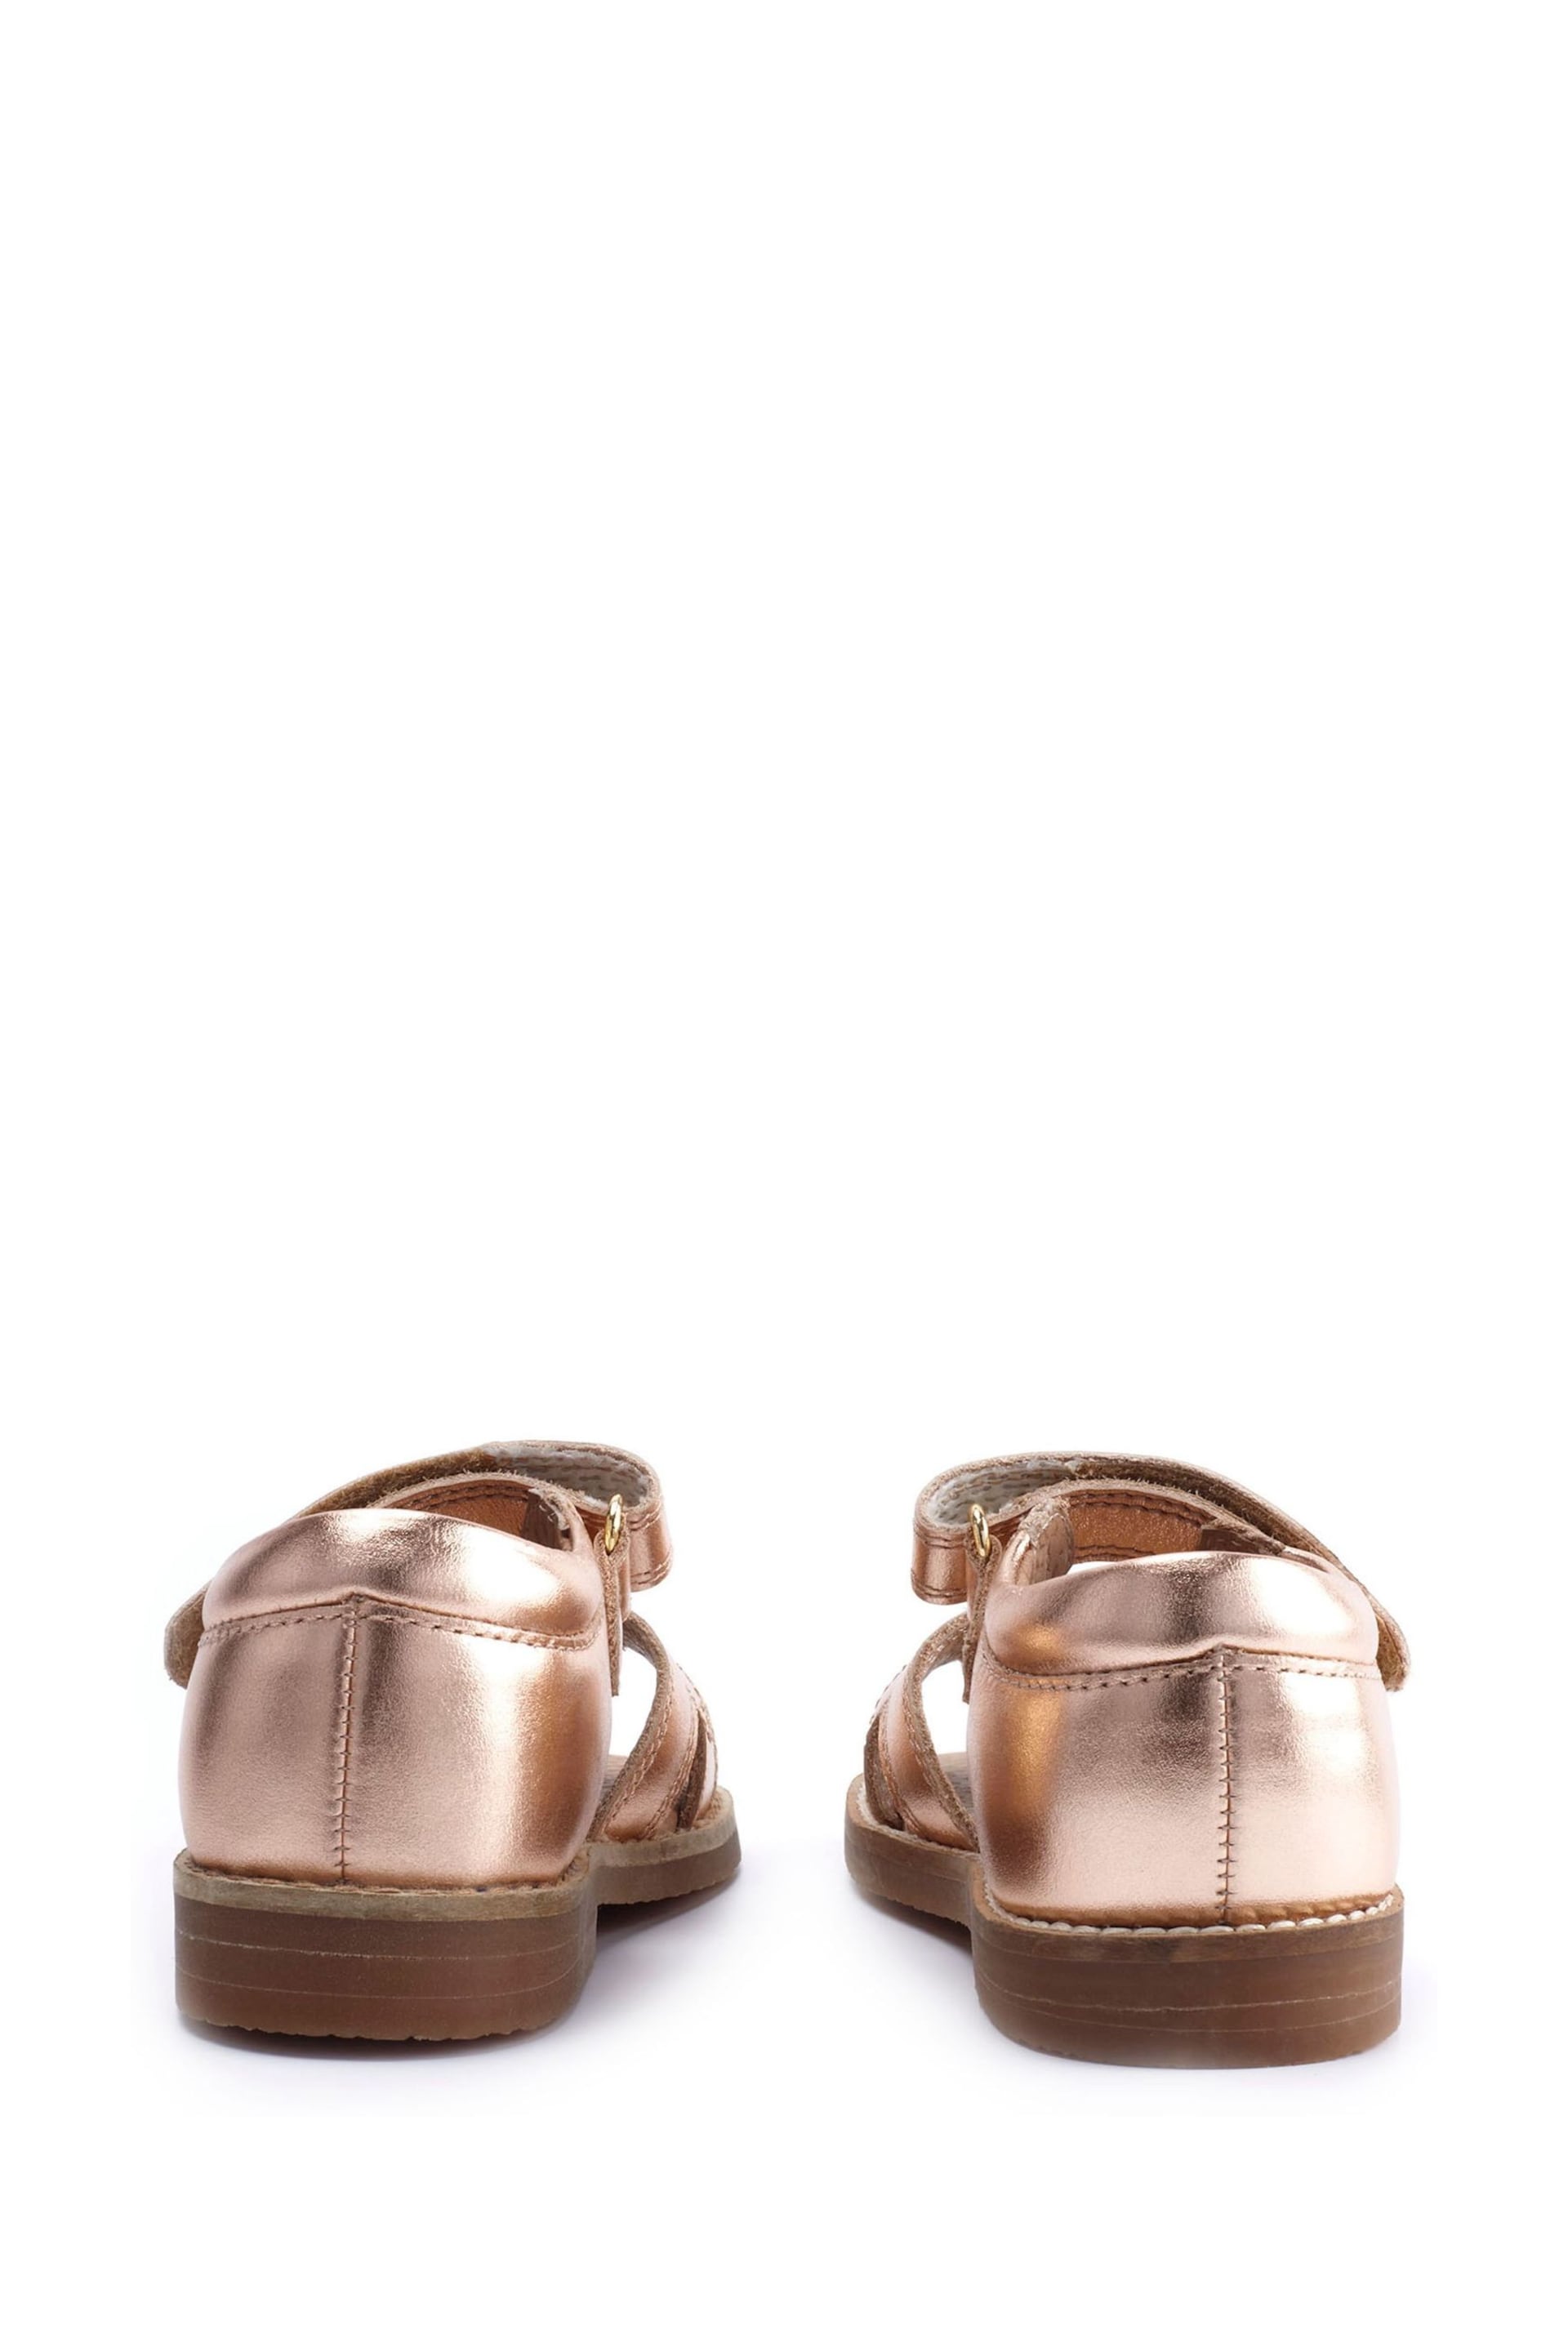 Start-Rite Gold Seashore Leather Rip-Tape Sandals - Image 2 of 5